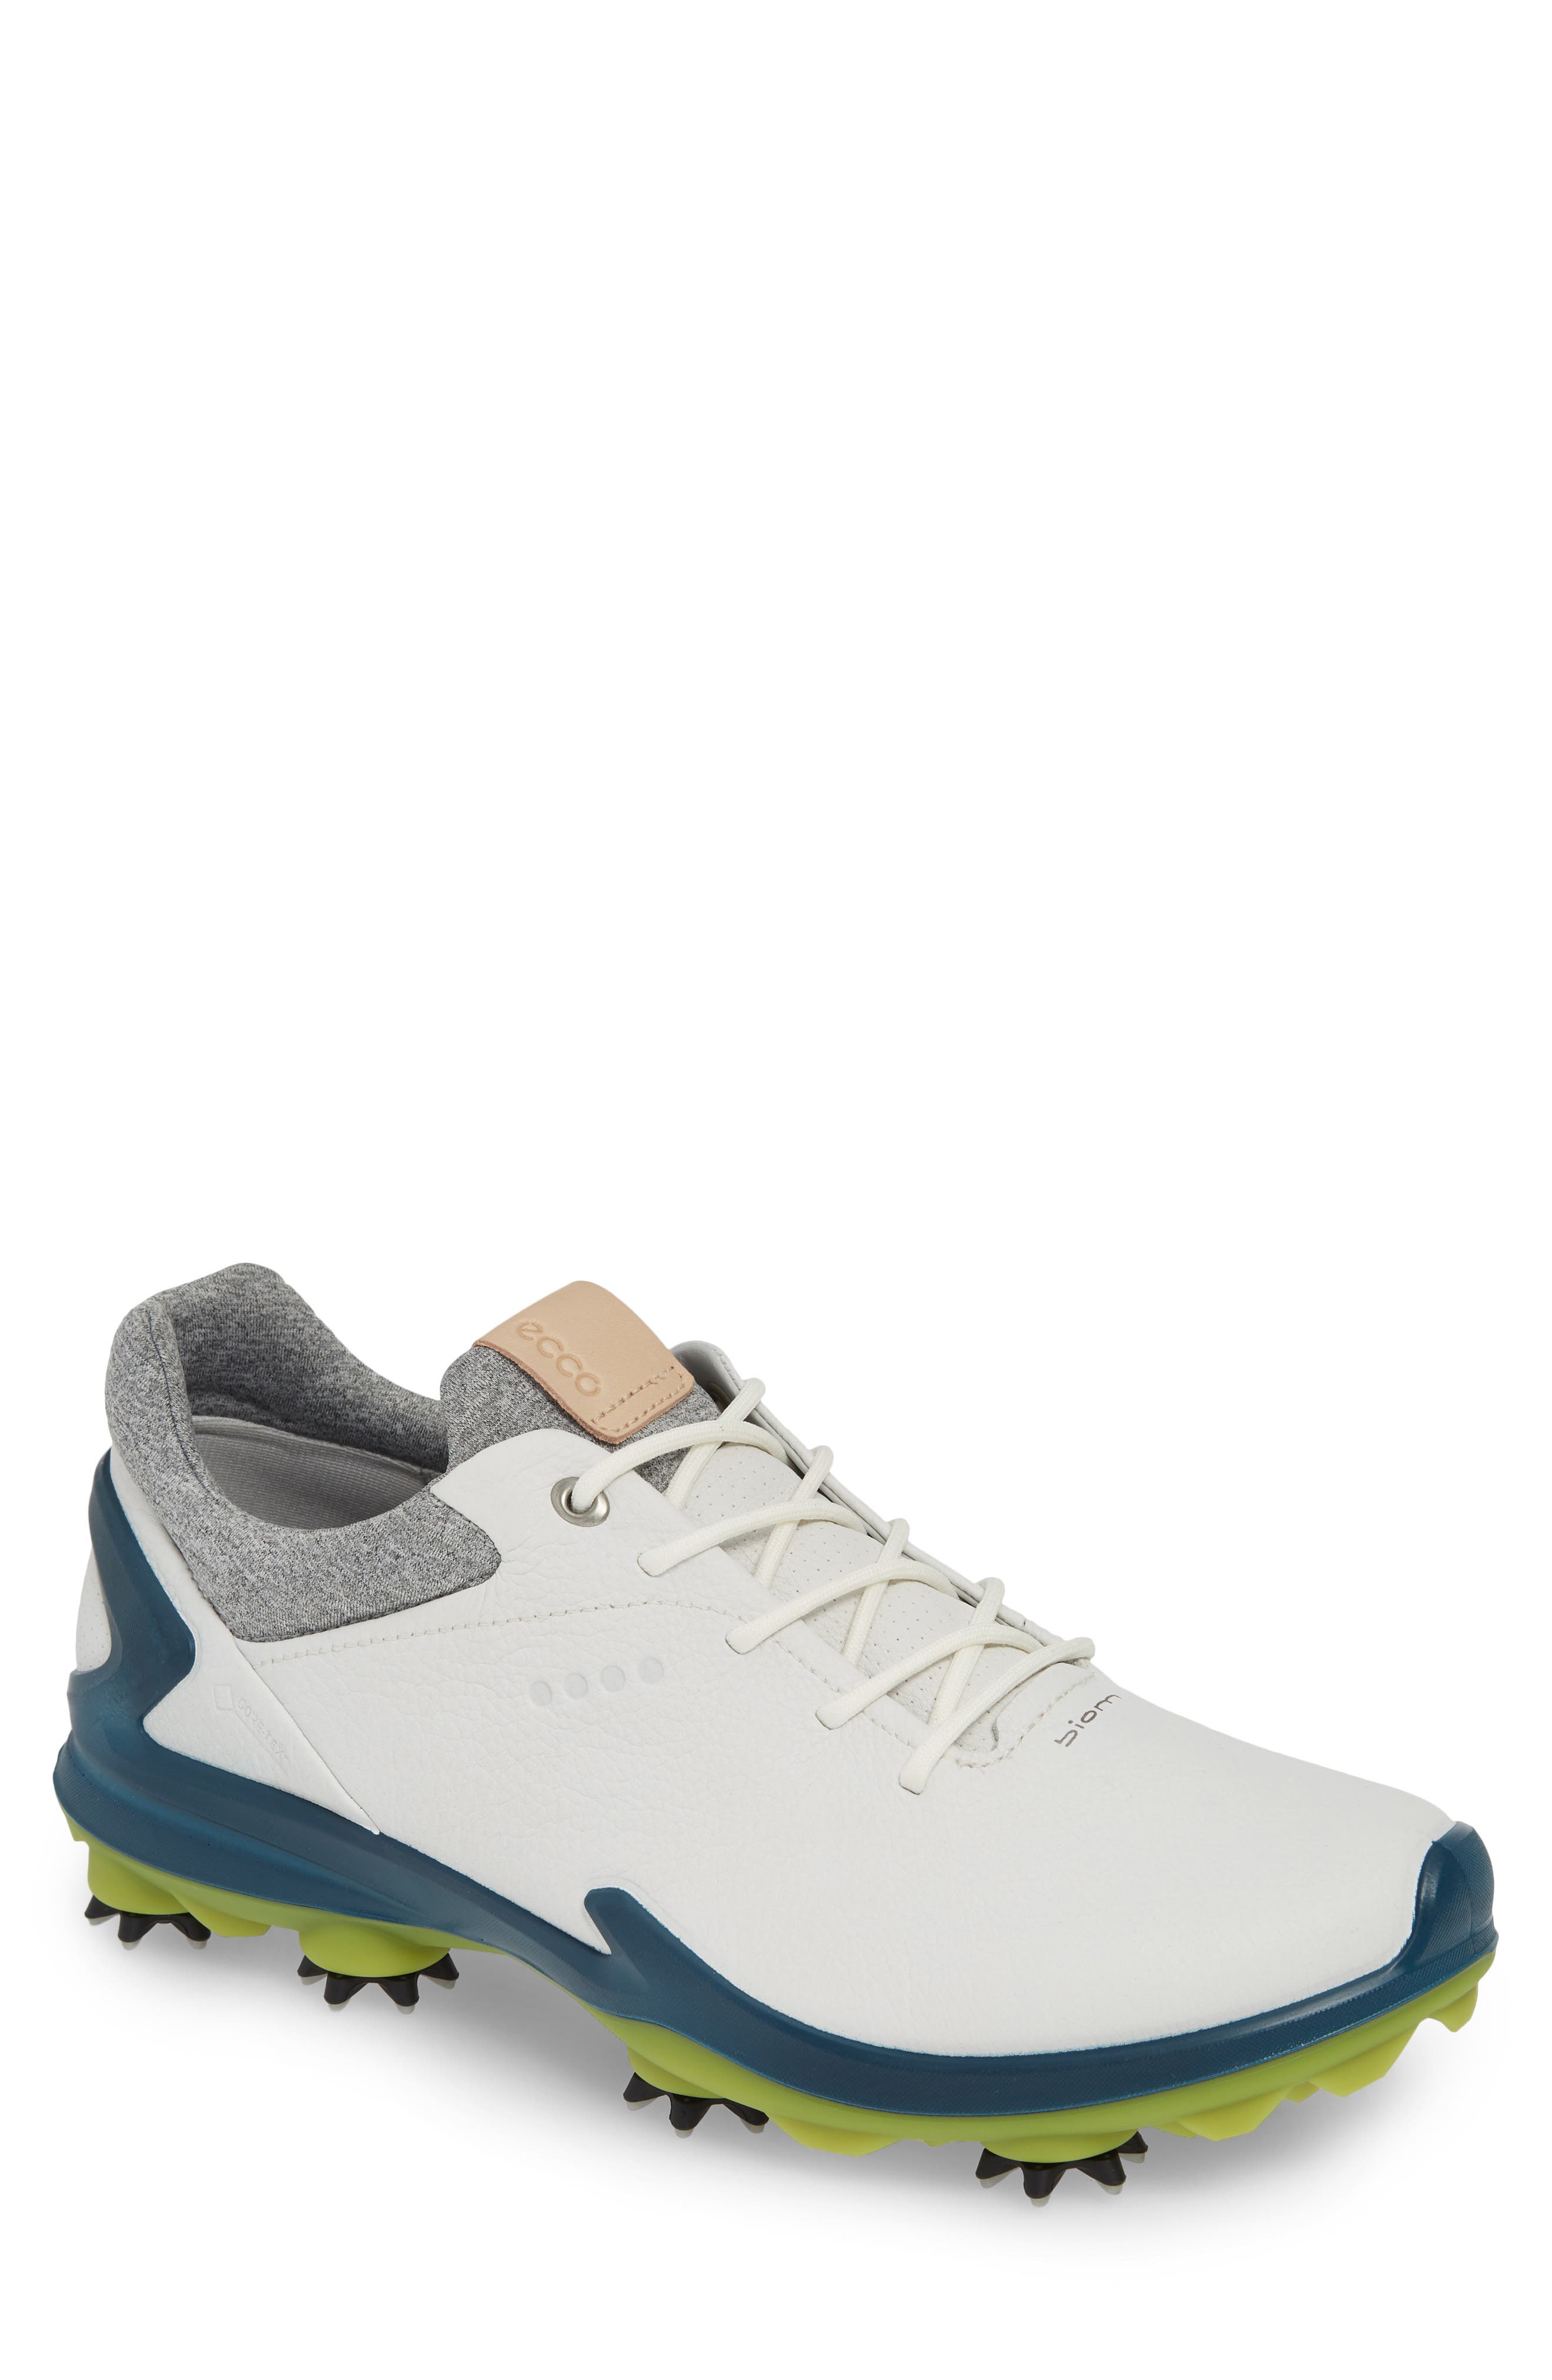 golf shoes with arch support